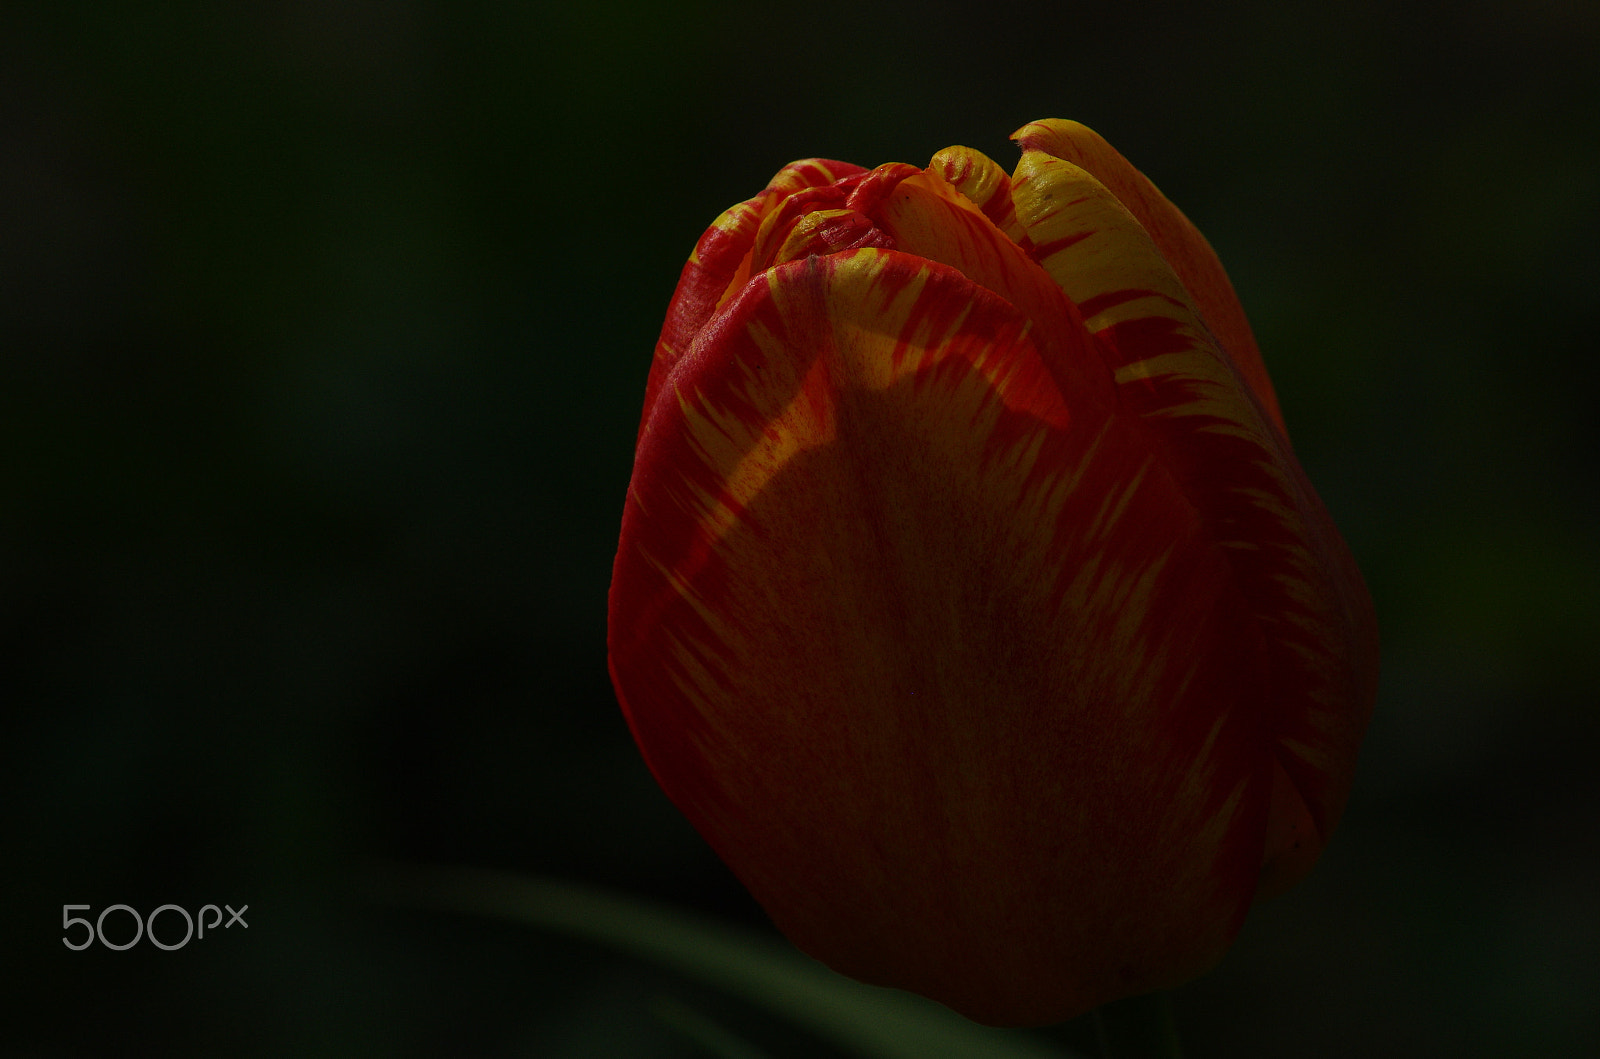 Pentax K-5 IIs sample photo. The touch of light on red and yellow photography